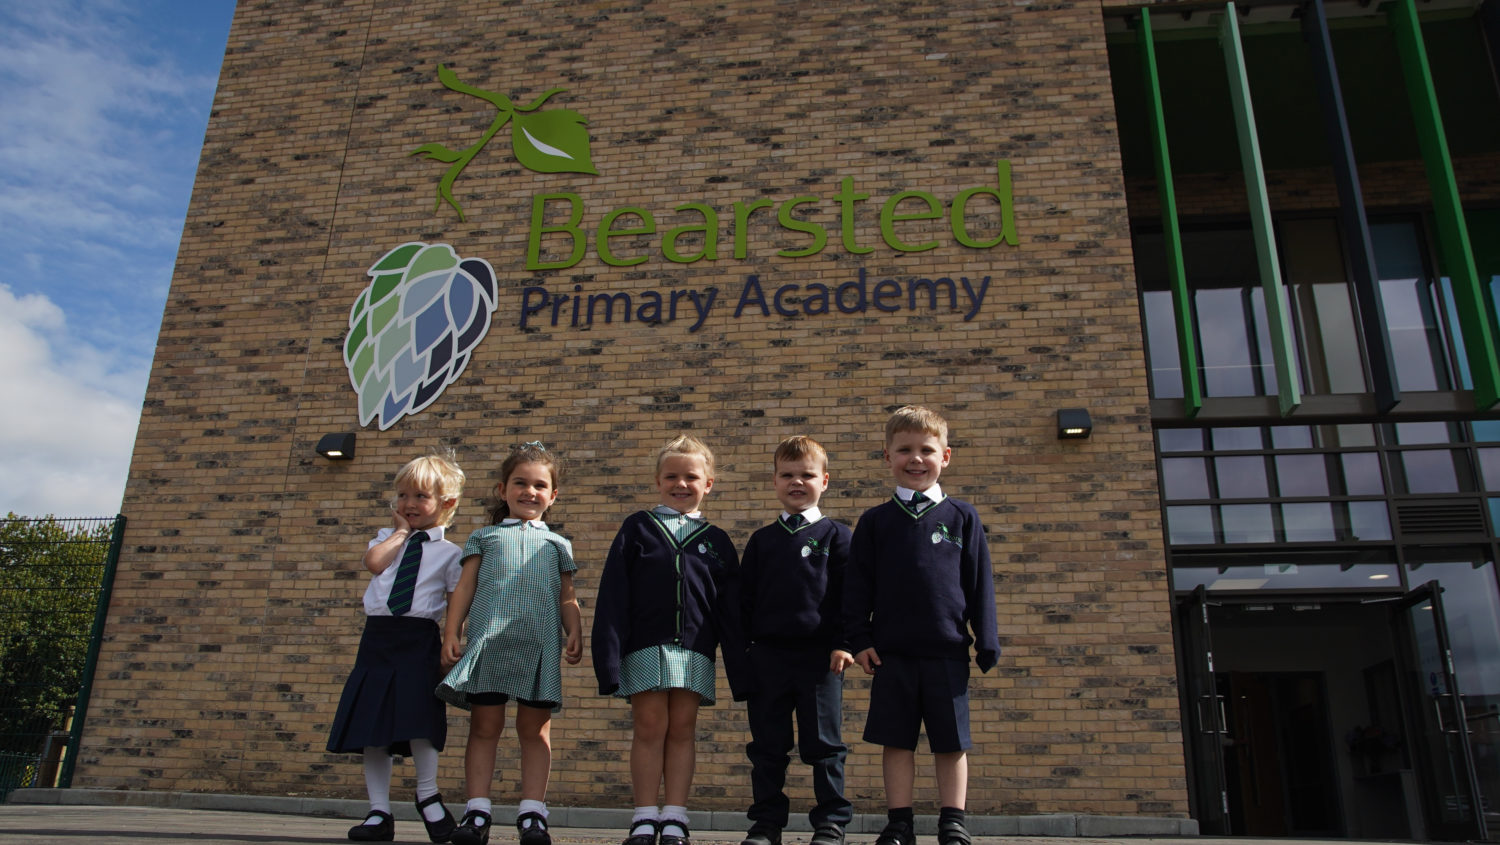 A group of children stood under the outside Bearsted Primary Academy sign